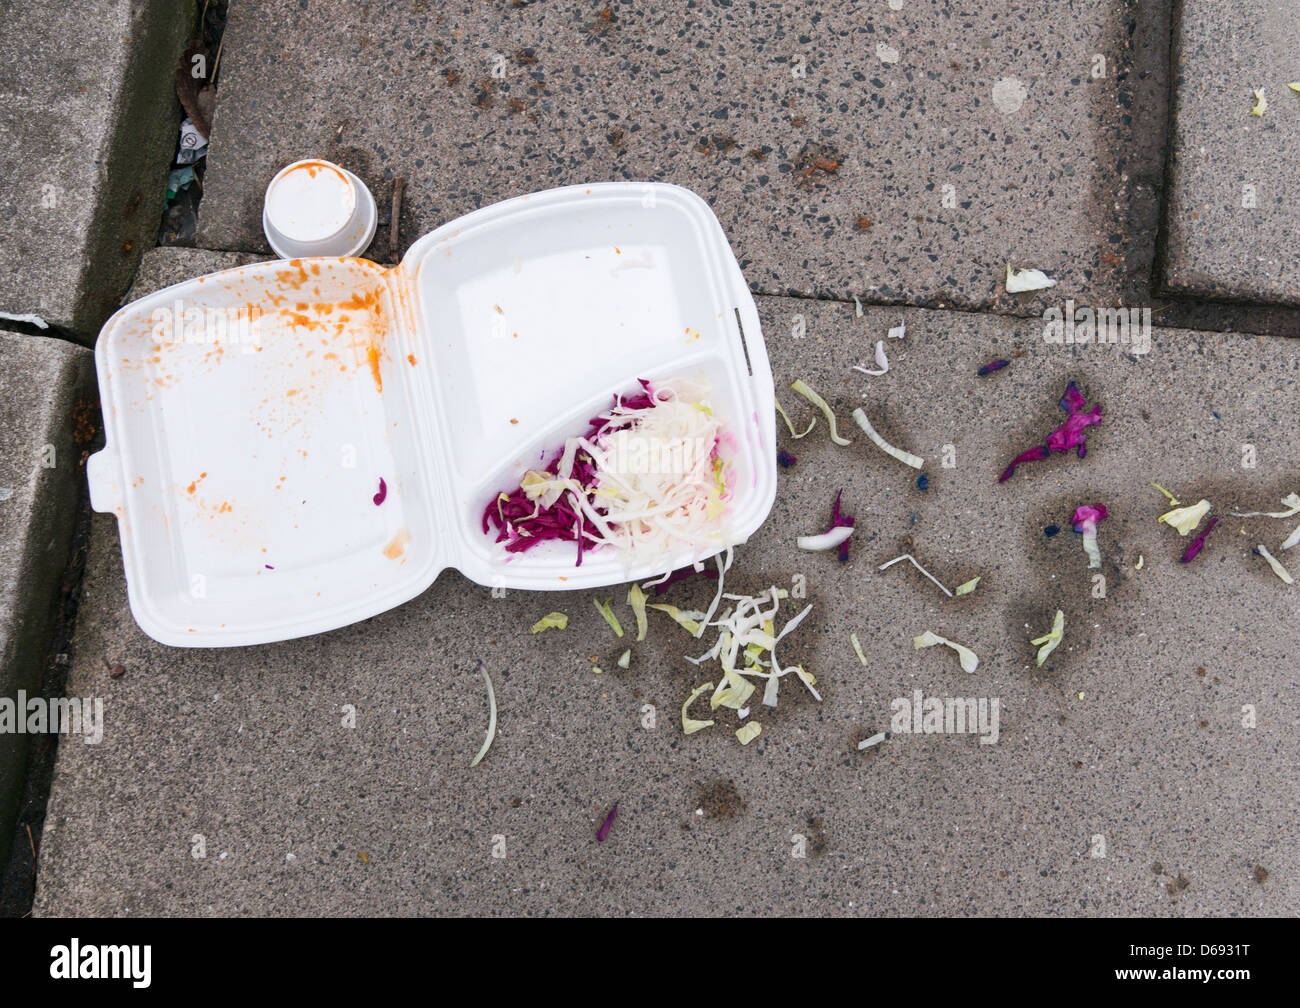 Discarded take away food container on pavement, north east England UK Stock Photo